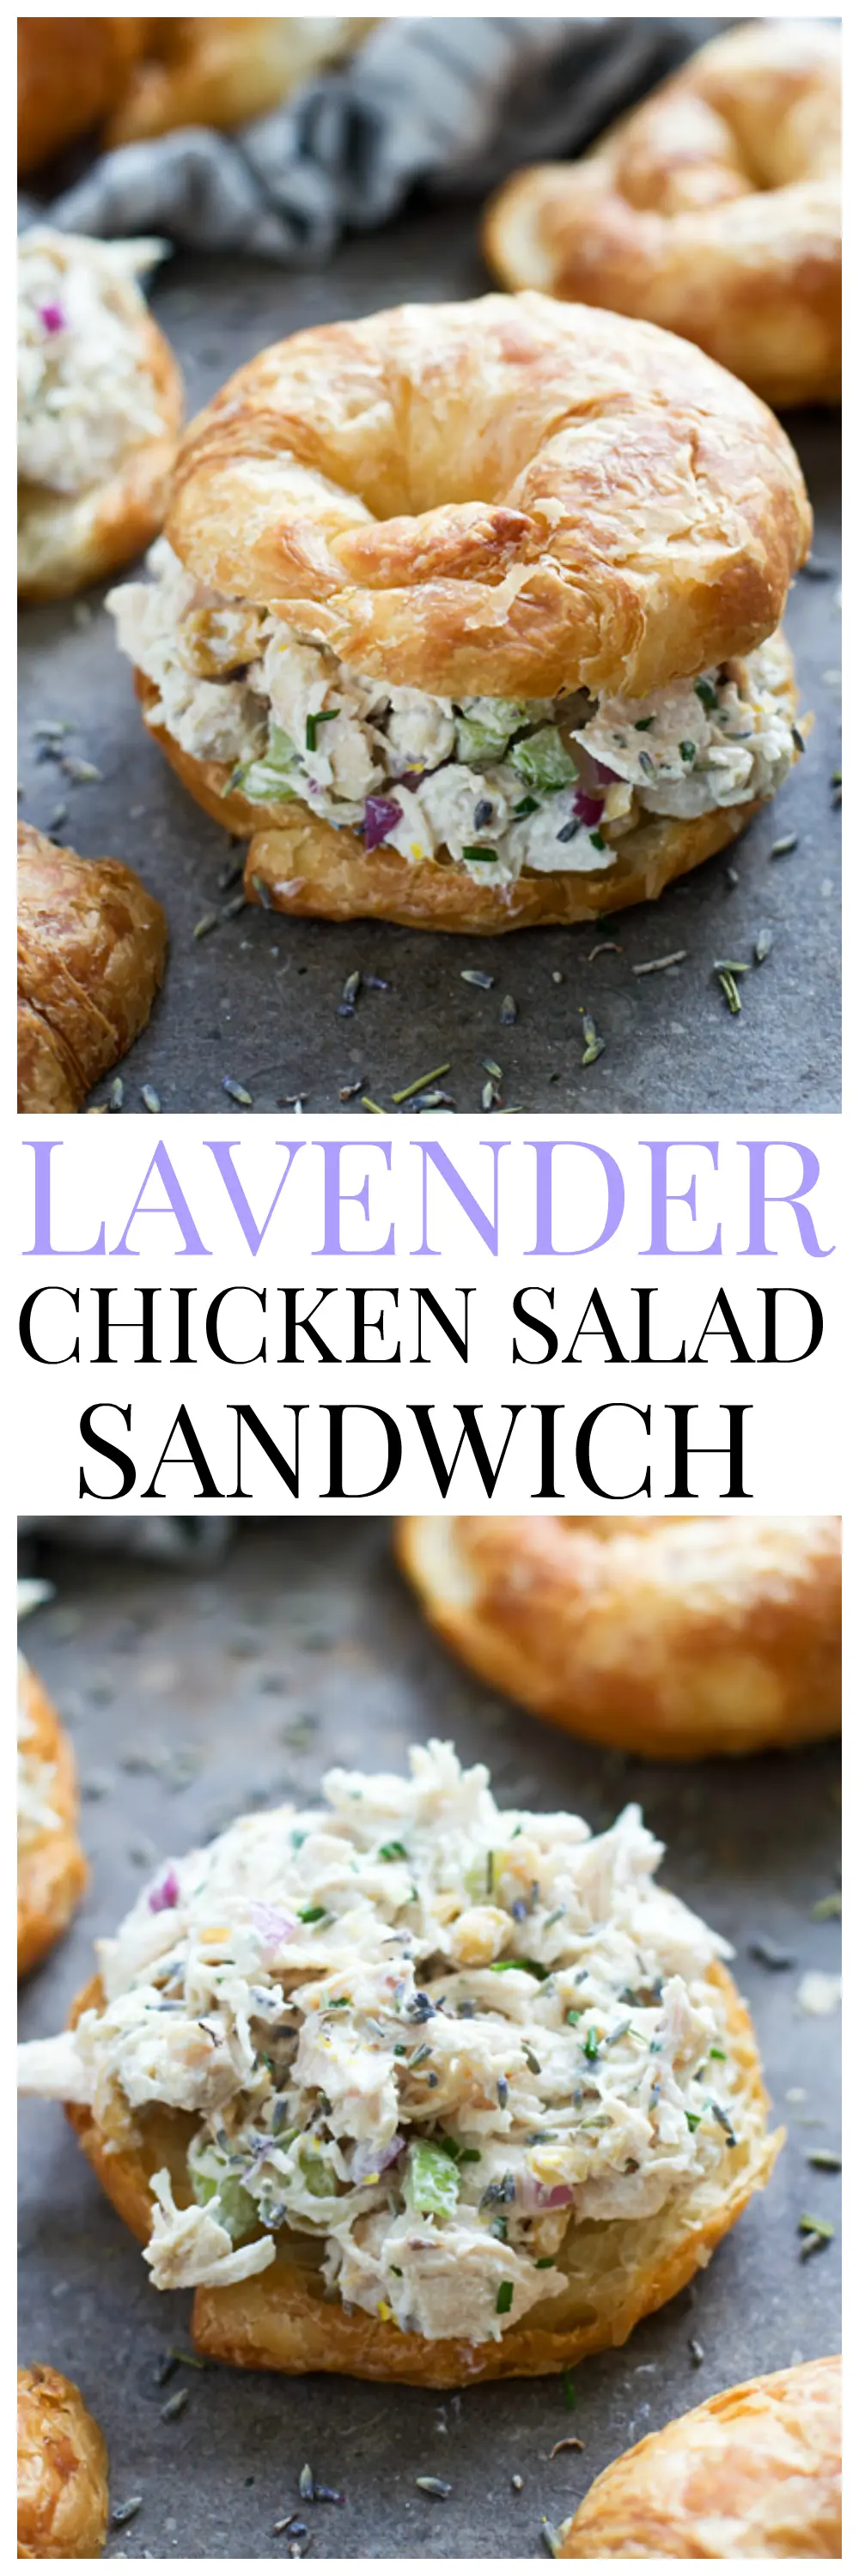 Lavender and Lemon Zest Chicken Salad Sandwiches (Lightened up with Greek yogurt and low-fat mayo!)